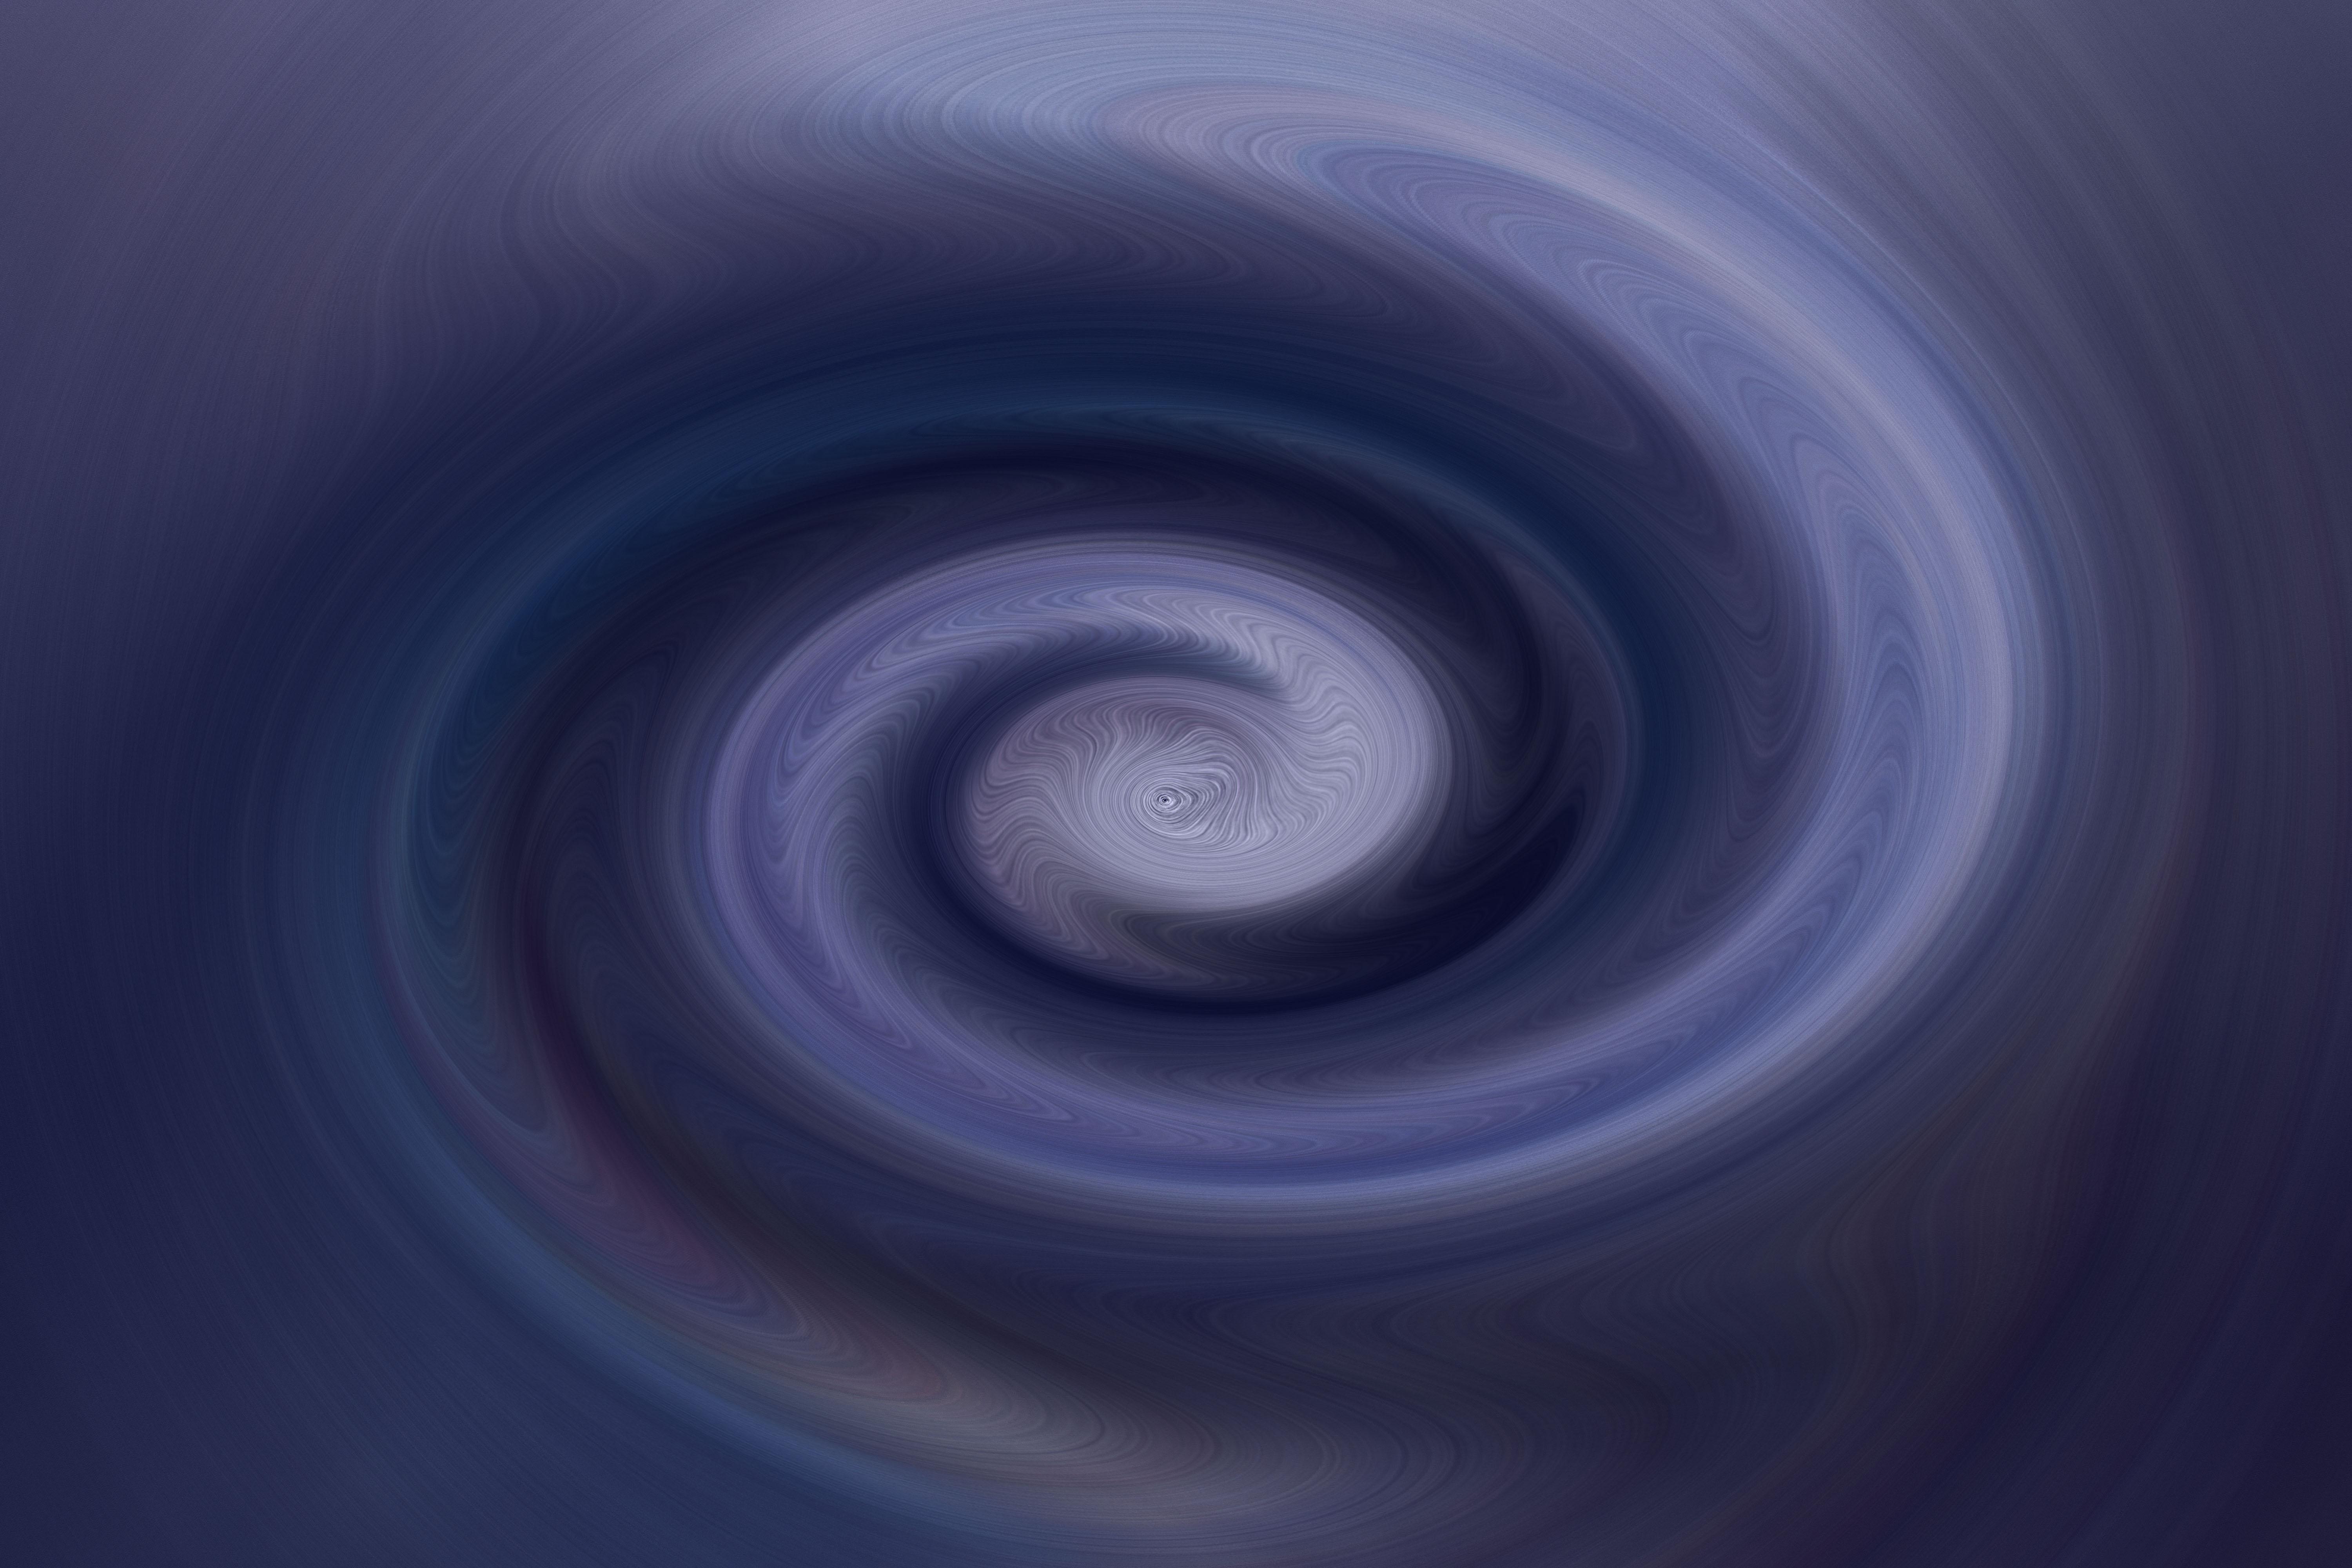 Outer Space Vortex wallpapers  Outer Space Vortex stock photos